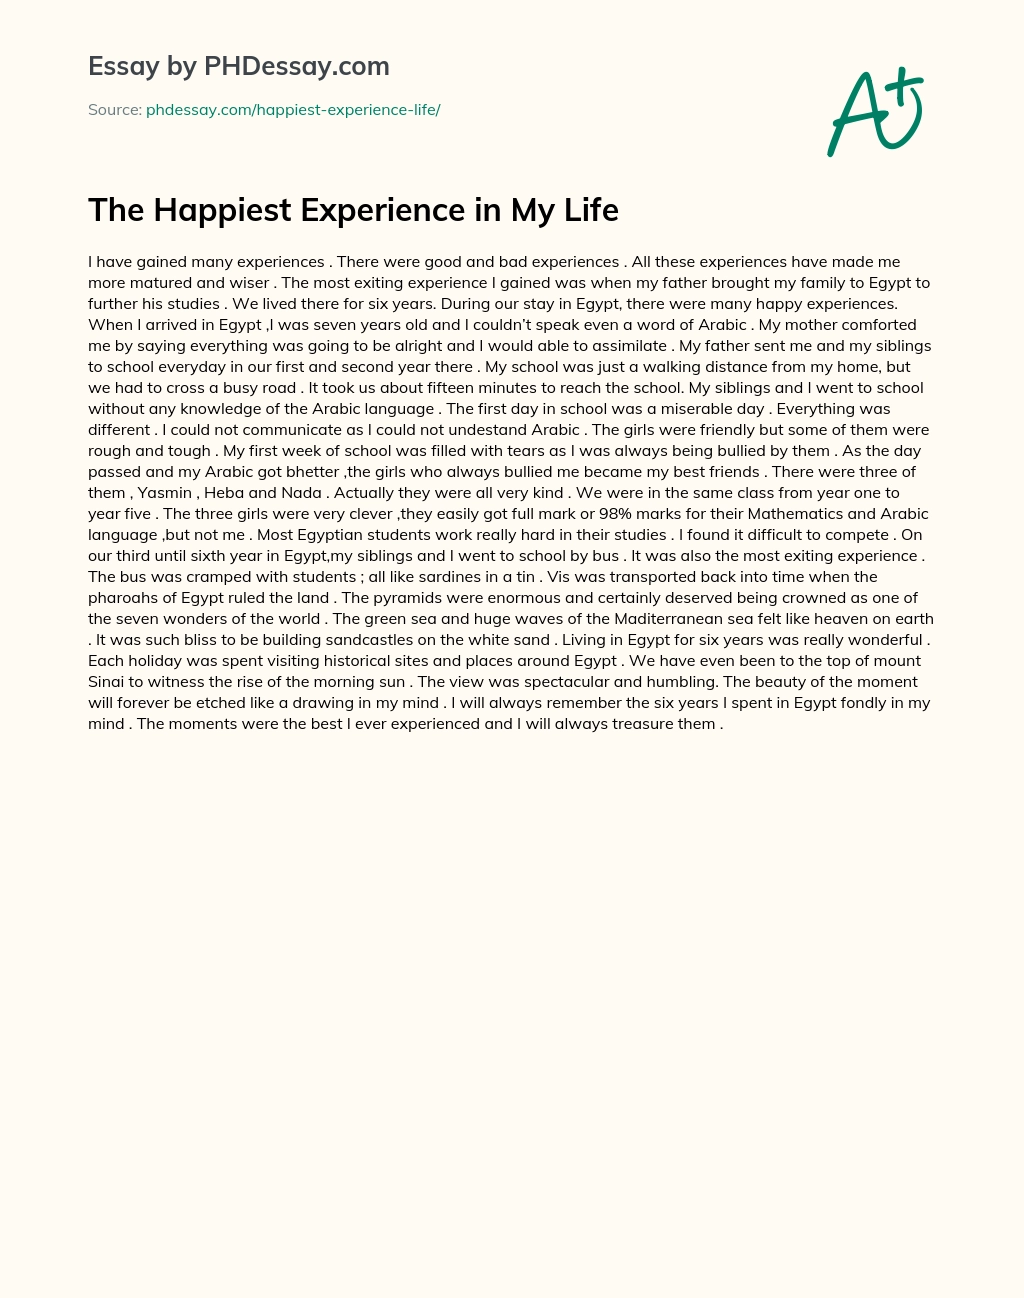 meaningful life experience essay